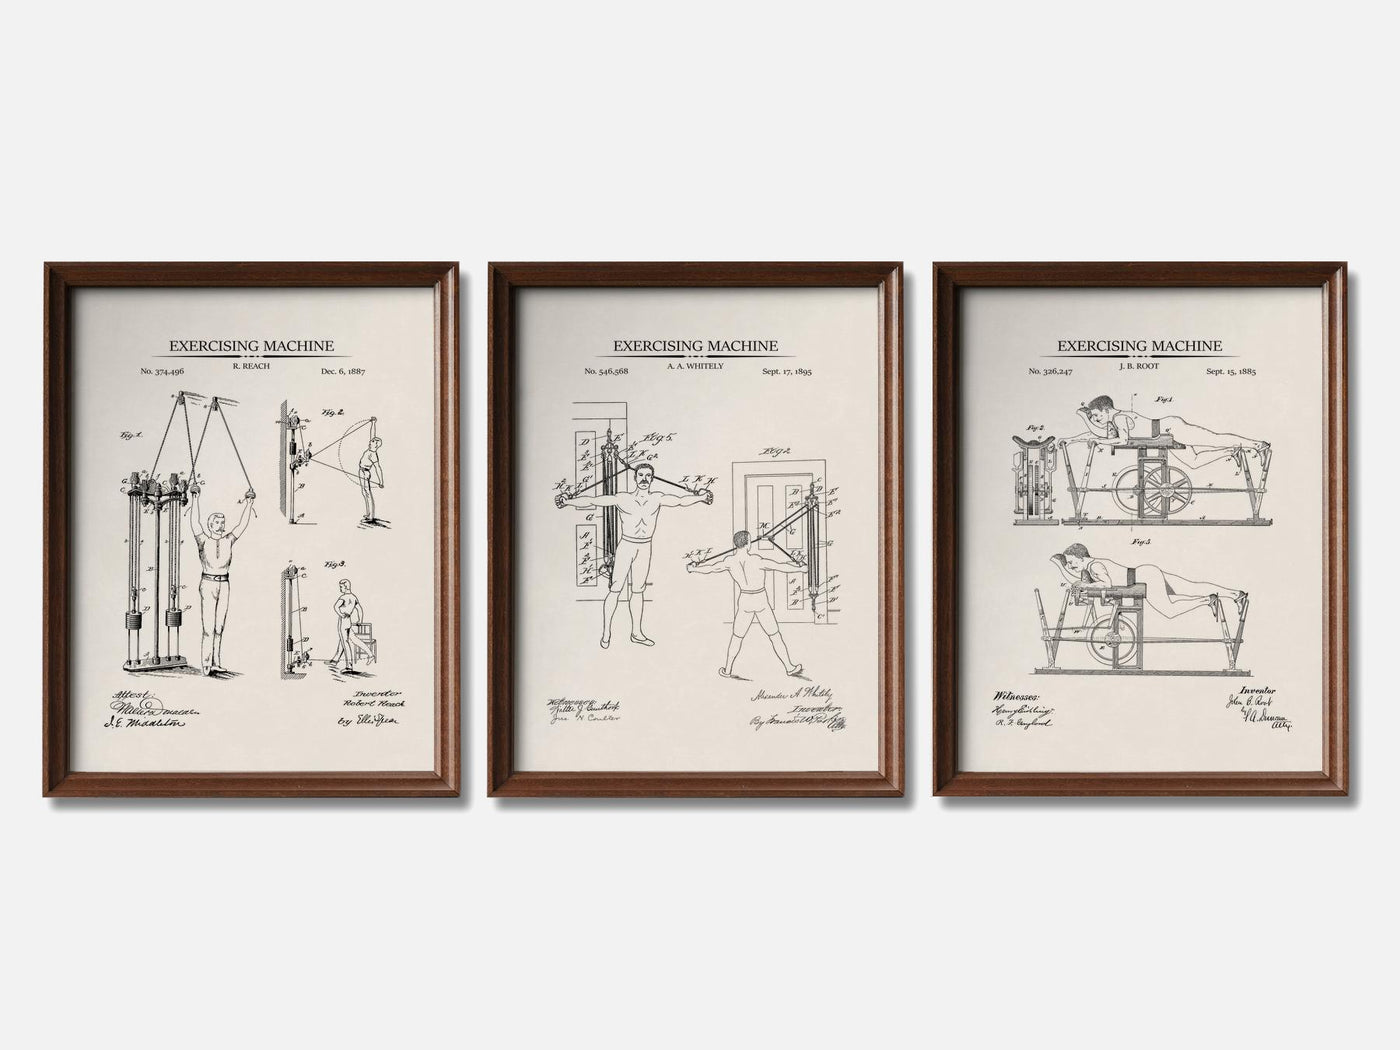 Vintage Workout Patent Print Set of 3 mockup - A_t10055-V1-PC_F+WA-SS_3-PS_11x14-C_ivo variant